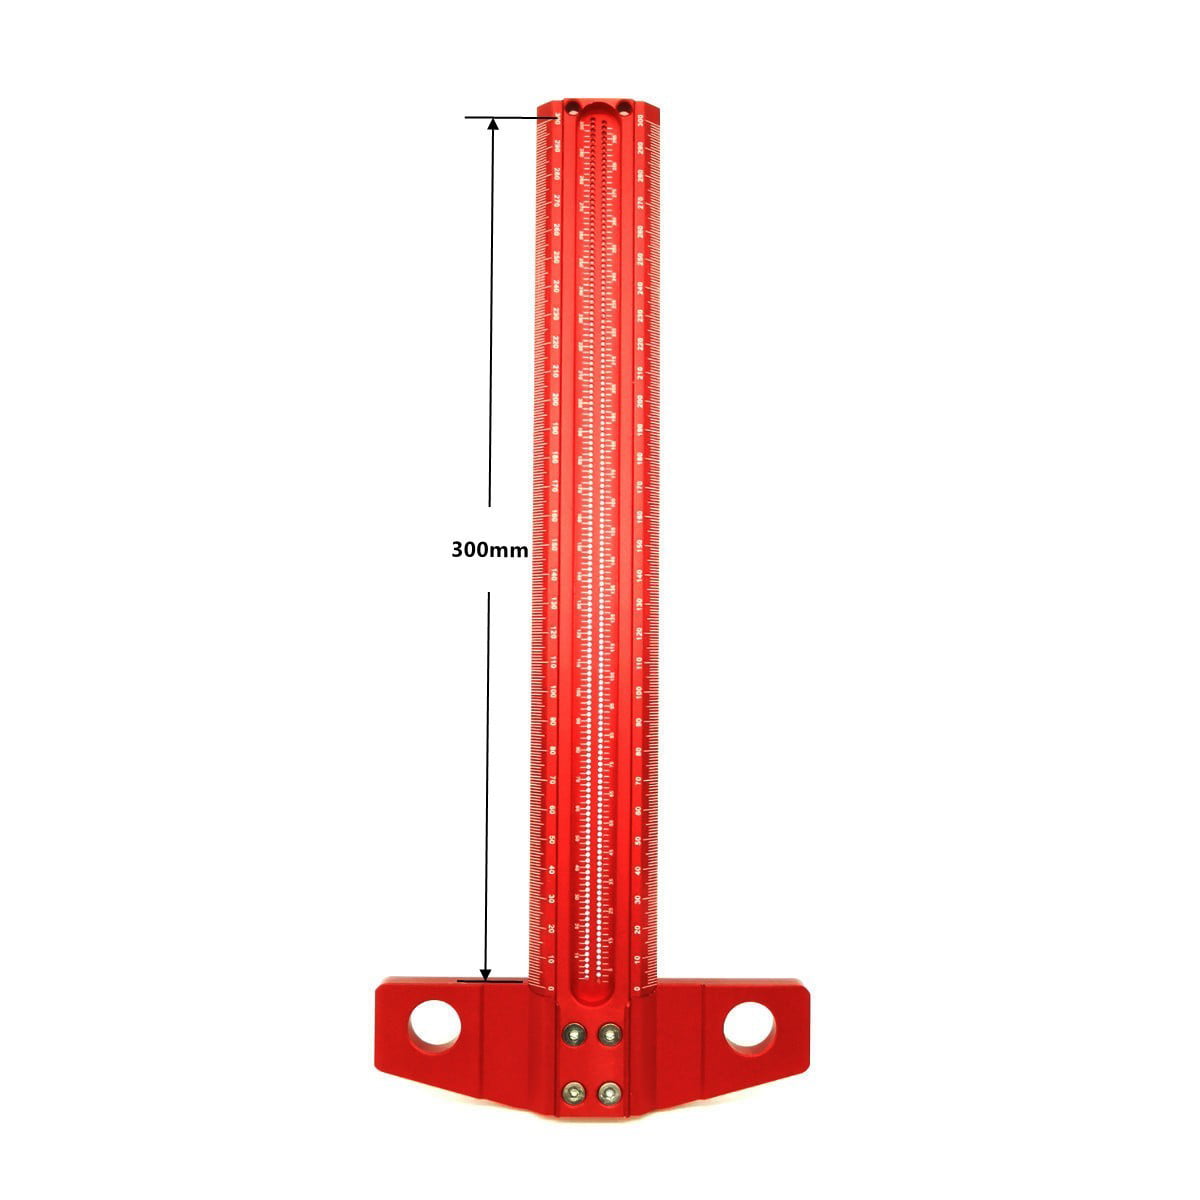 Scribing Ruler High Accuracy Aluminum Alloy Marking Tool for DIY Enthusiasts Woodworking Projects Measuring Ruler 